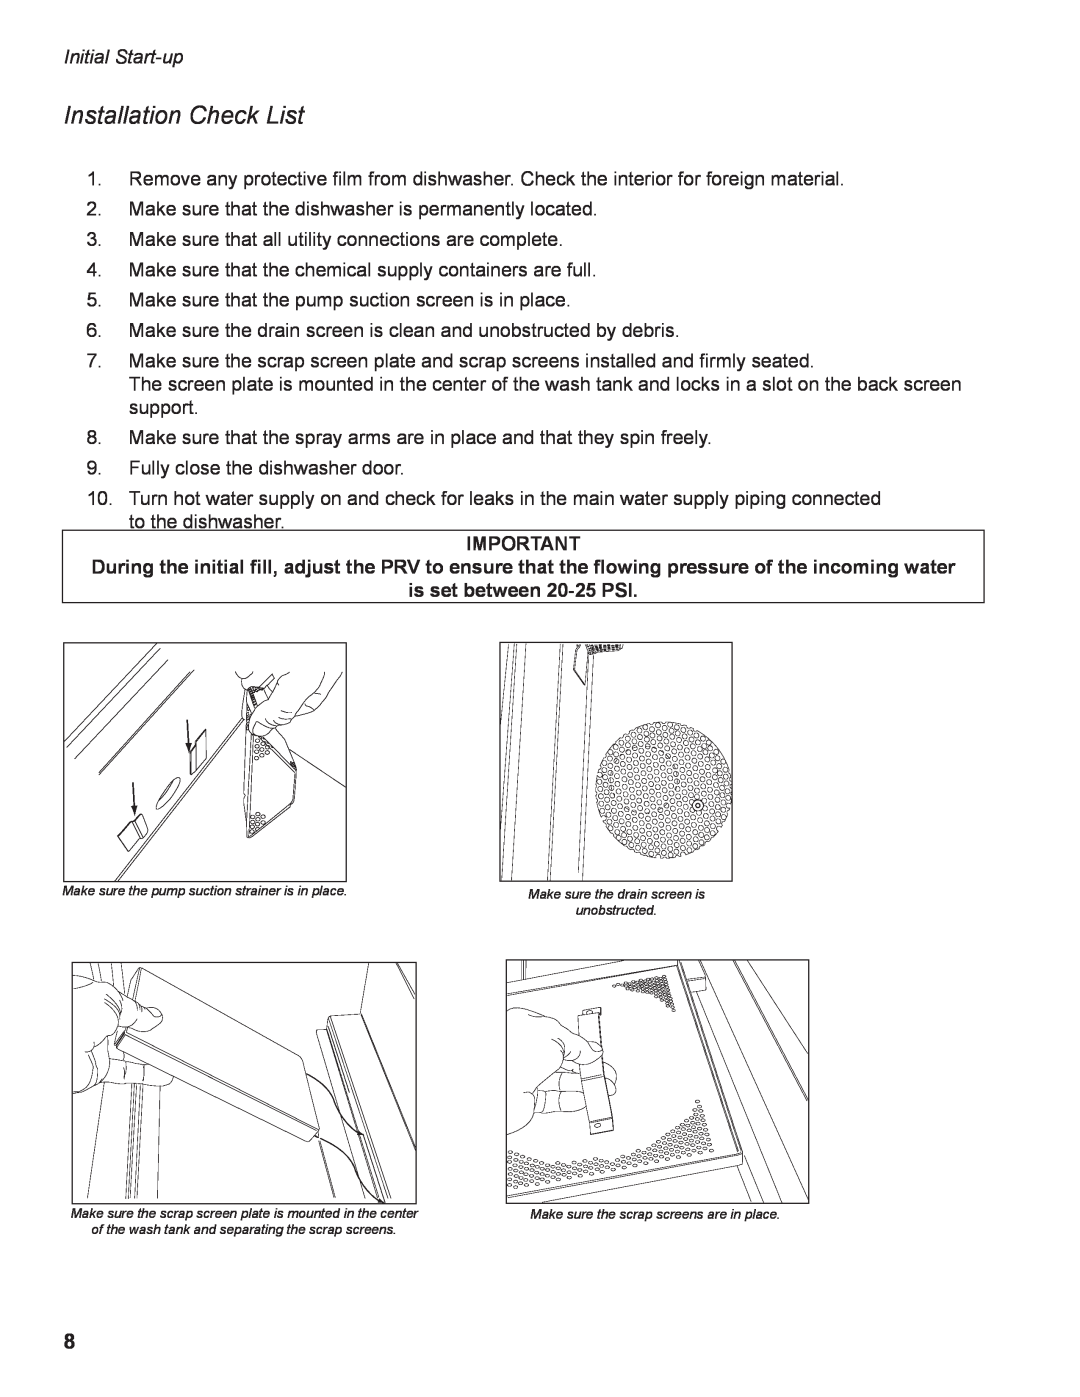 GE DH2000 operation manual Installation Check List, Initial Start-up, is set between 20-25 PSI 